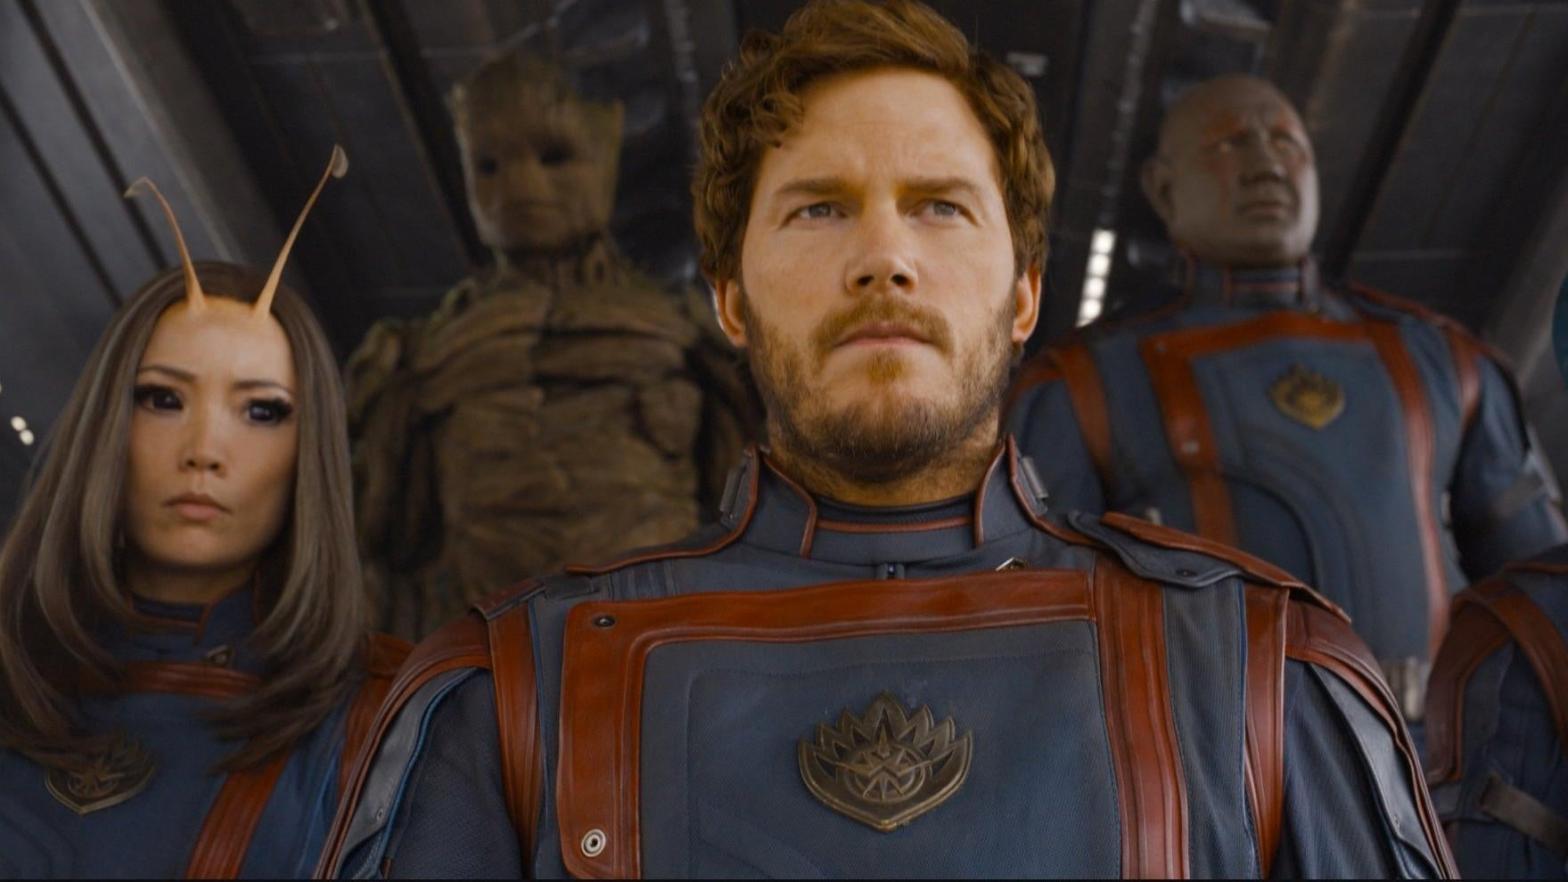 Will Guardians of the Galaxy Vol. 3 bring people back to the movies? (Image: Marvel Studios)